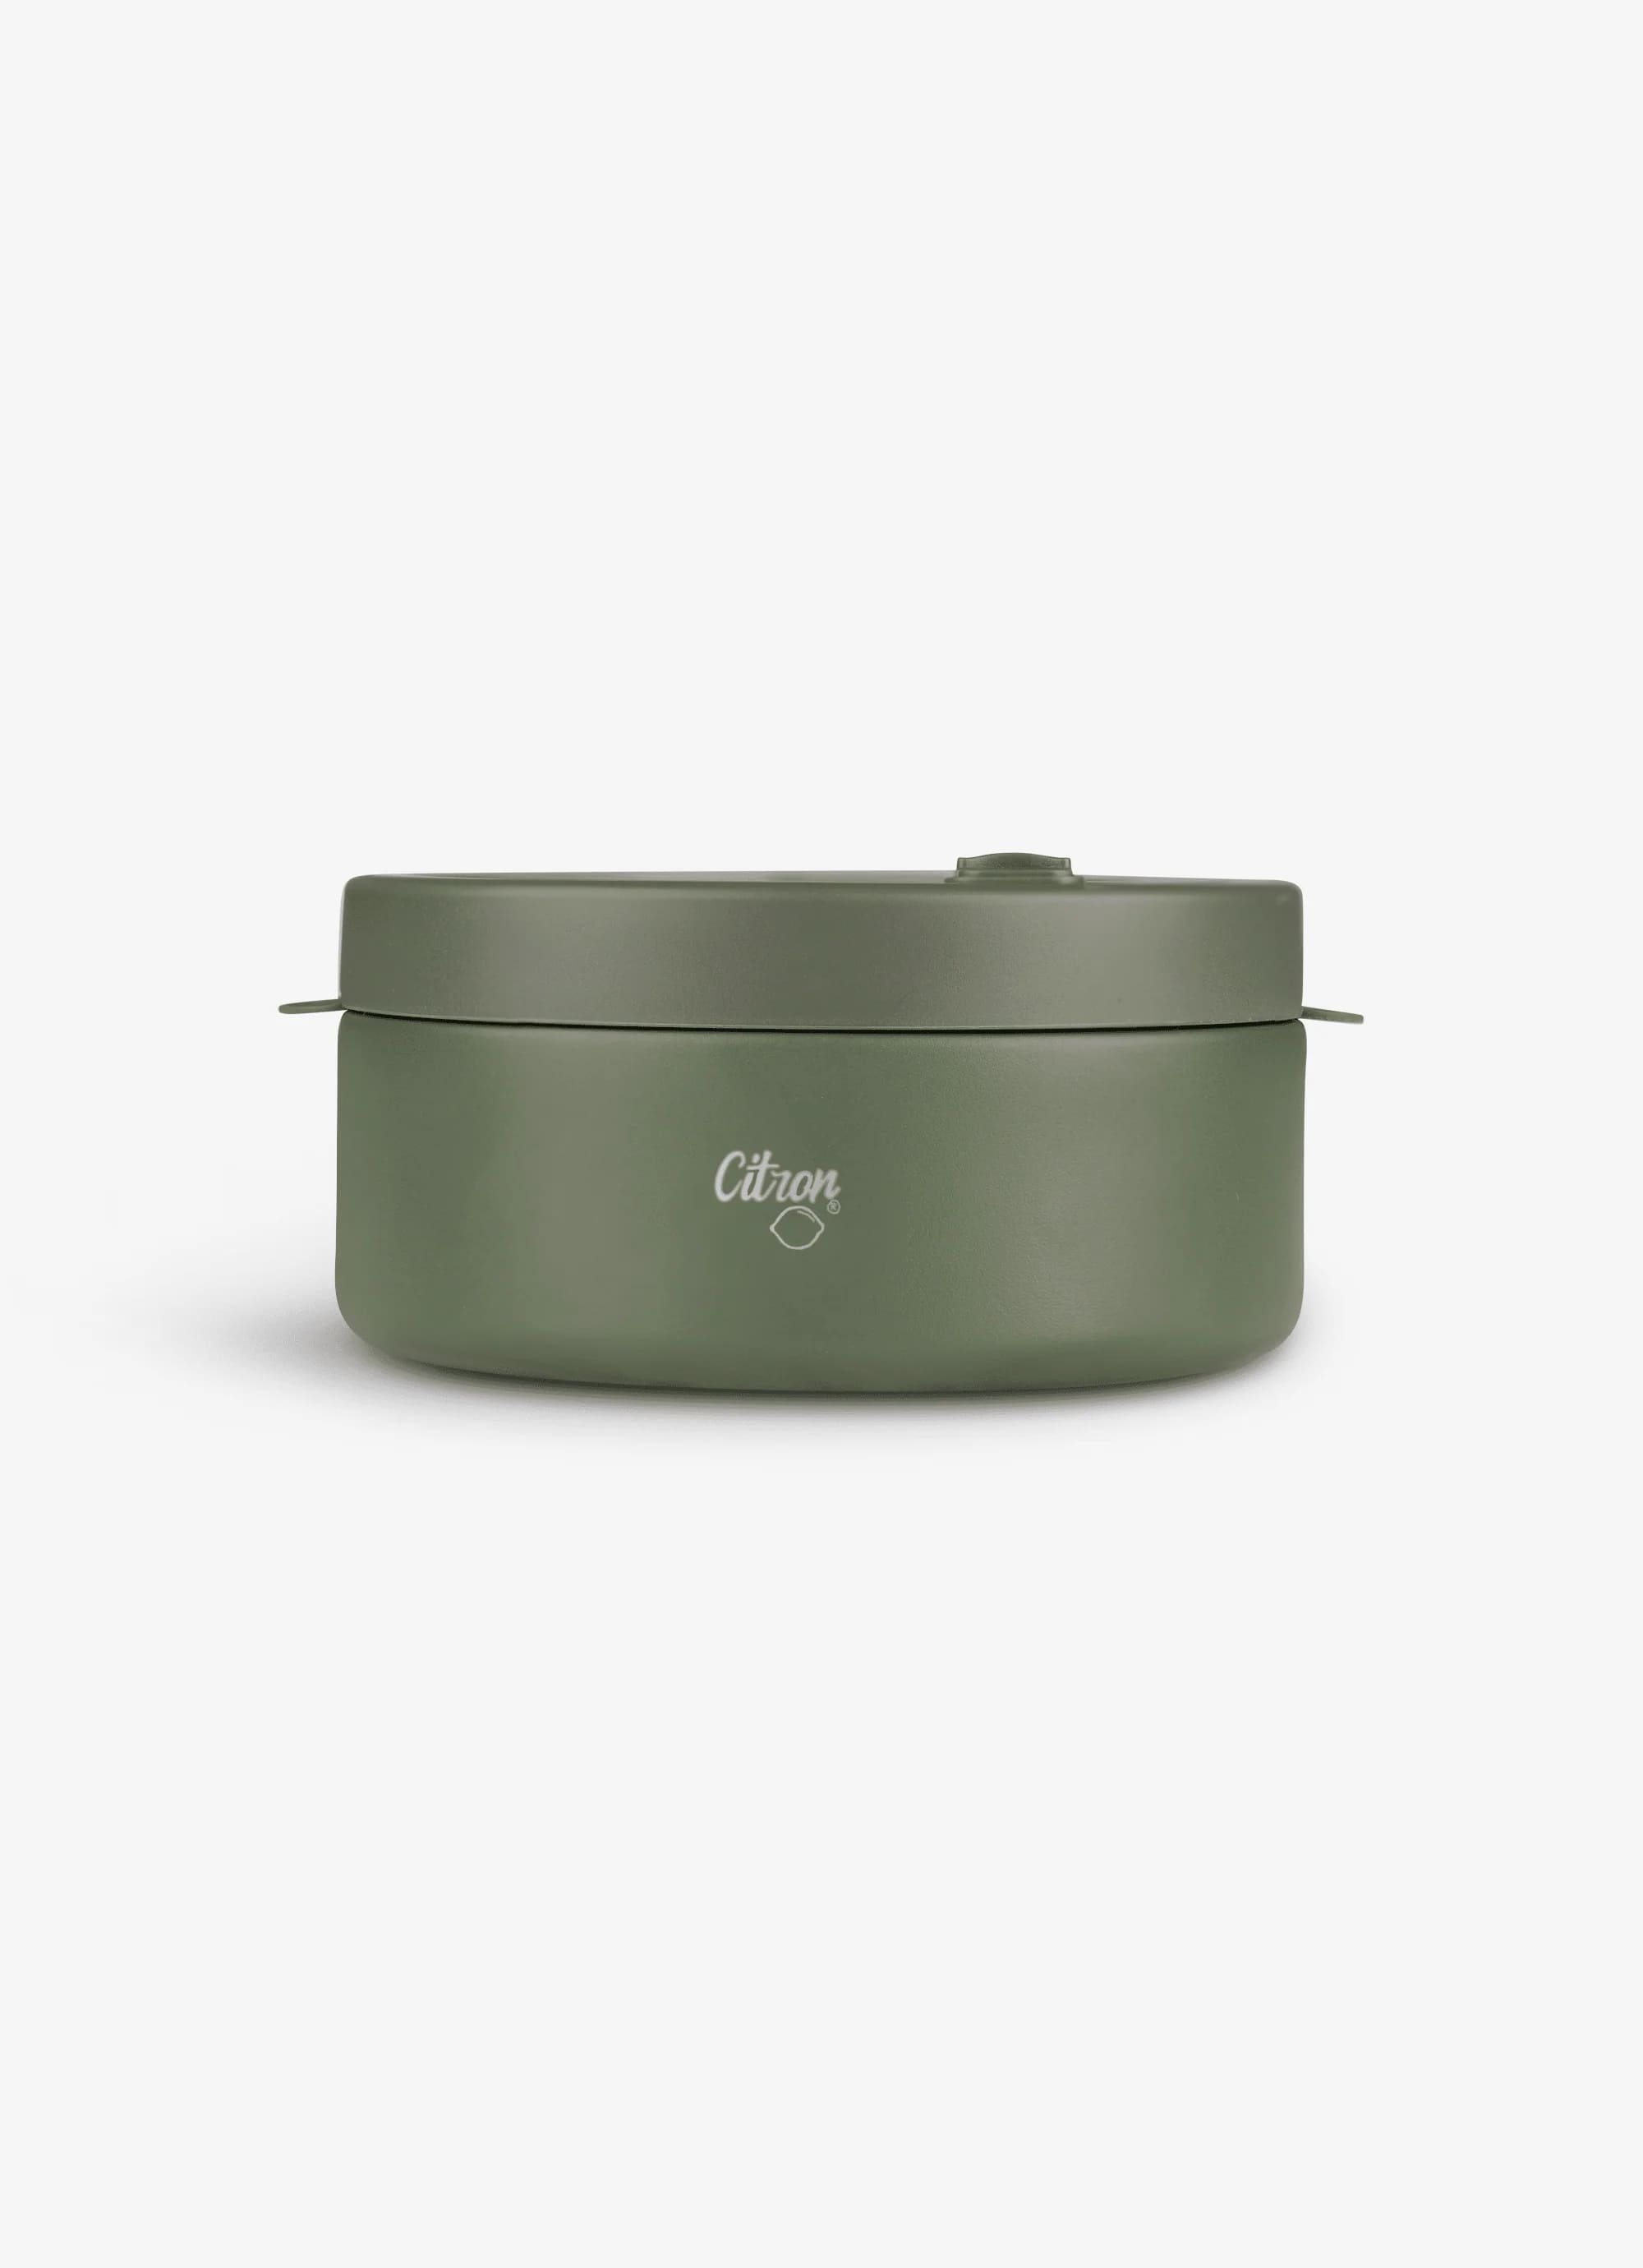 Citron Stainless Steel Insulated Food Jar 400ml - Green